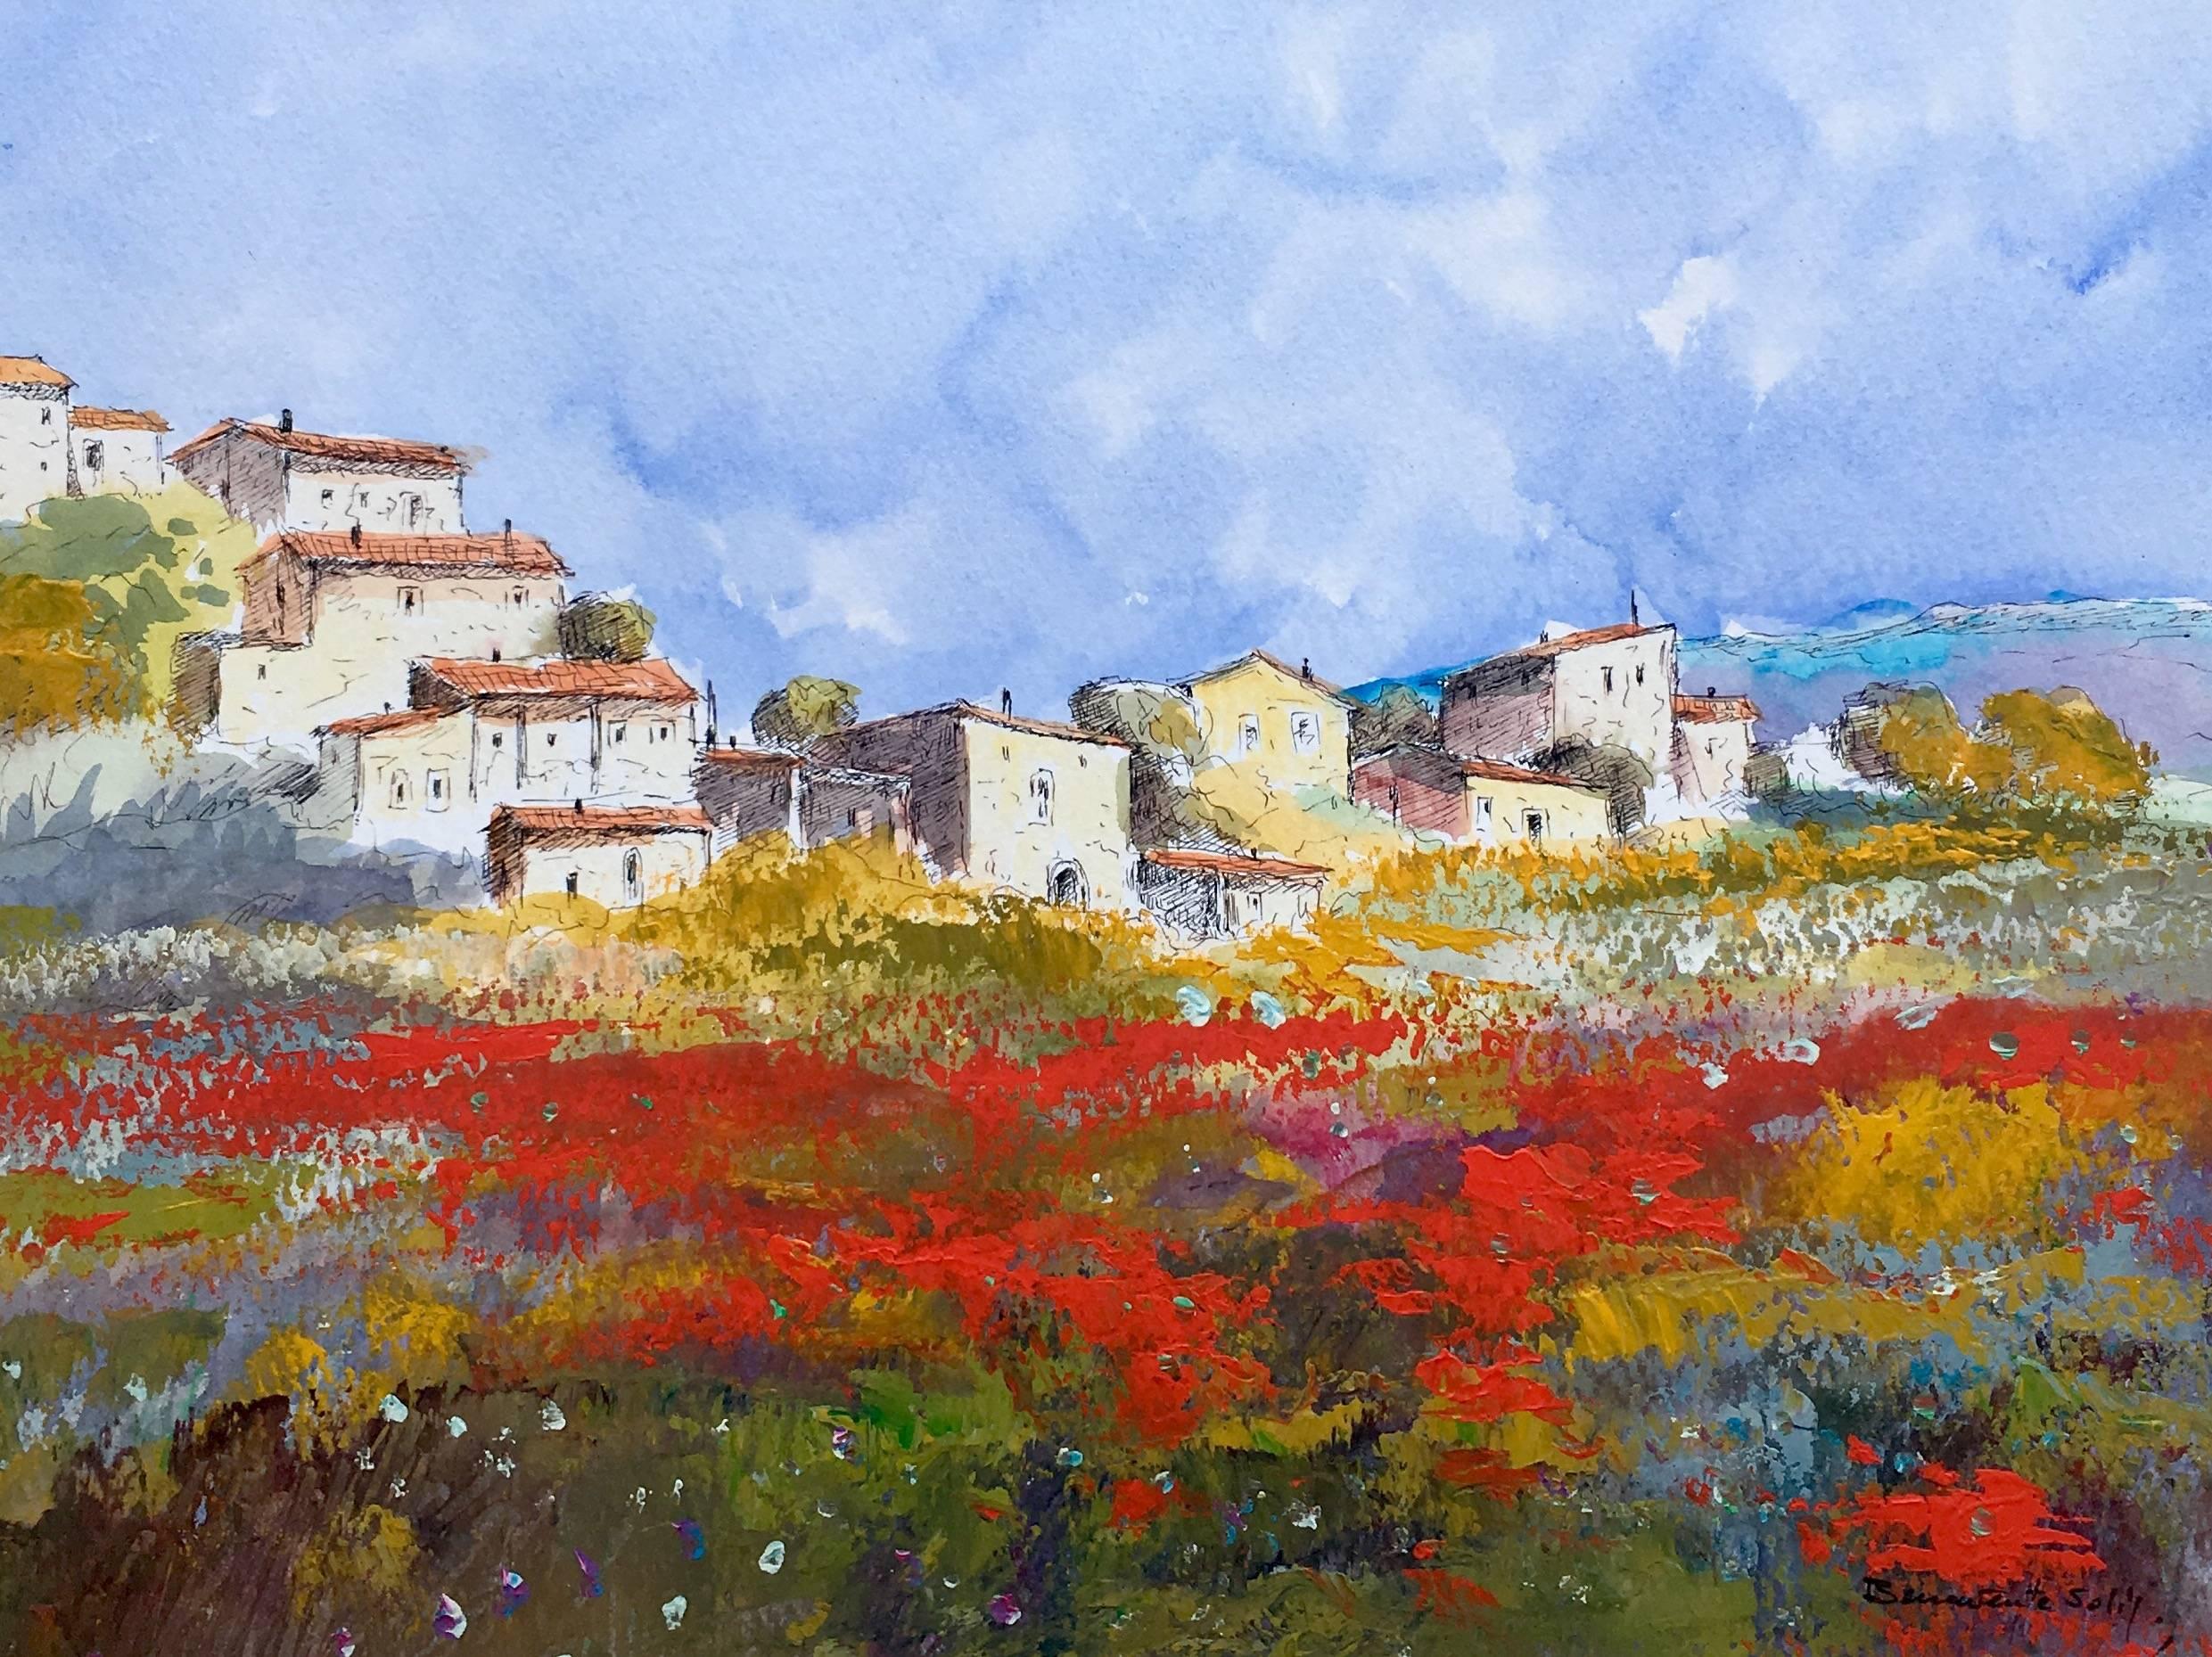 Benaavente Solis. 115 home. field. poppies.  Mallorca- original expressionist  - Painting by Benavente Solis